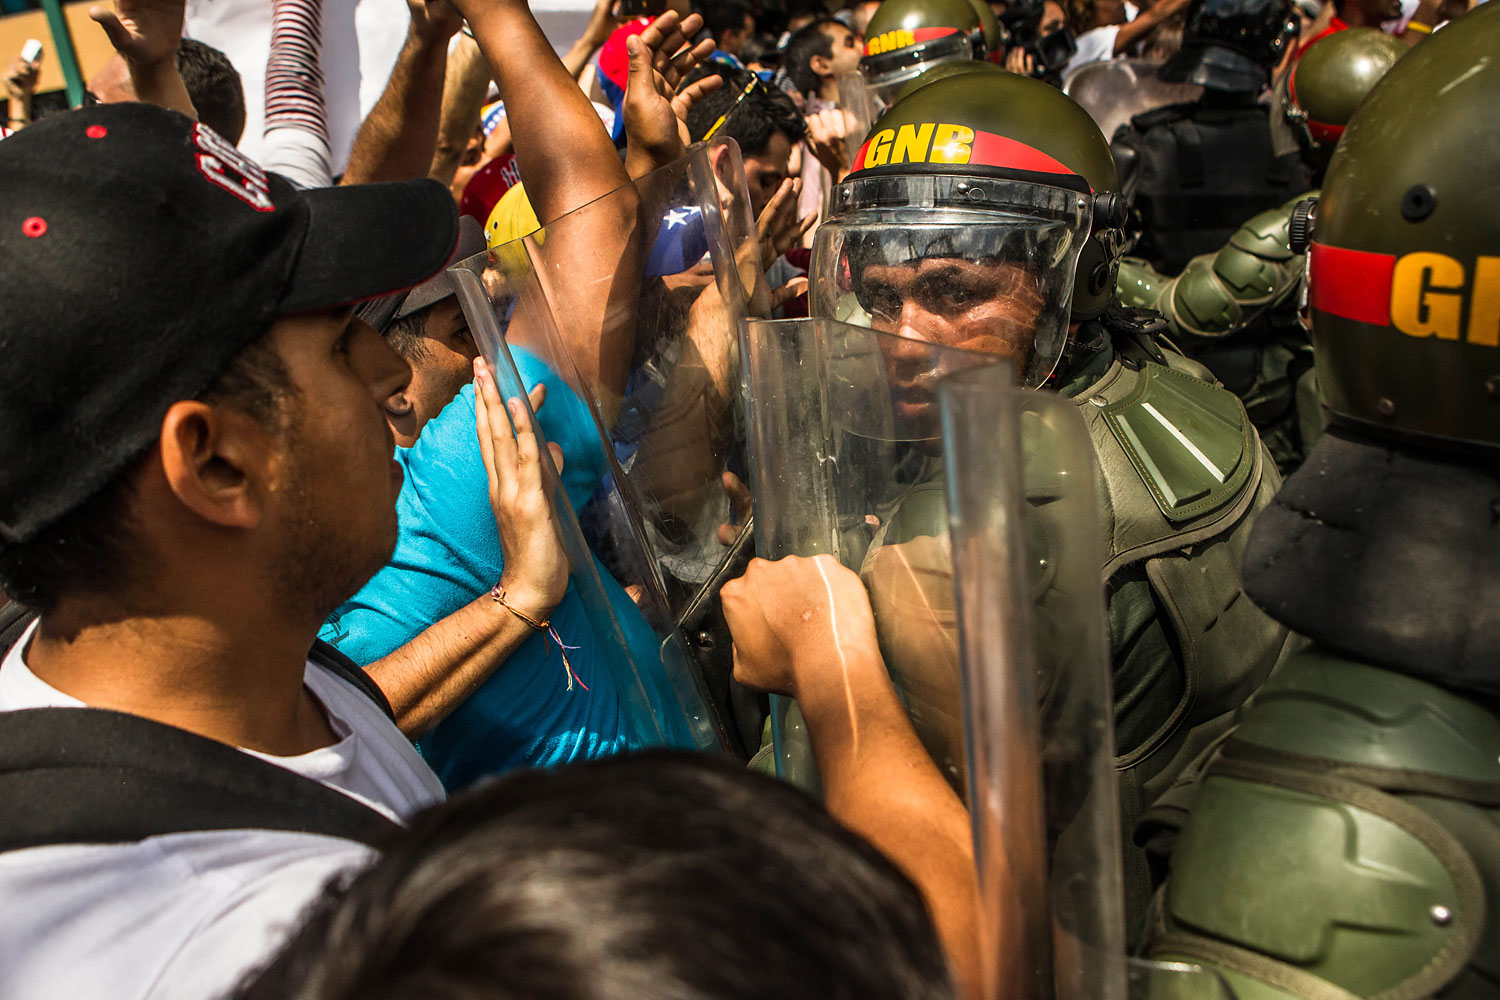 Lopez supporters clash with riot police in effort to block the path of the armored vehicle carrying Leopoldo Lopez after he surrendered to the police, in Caracas, Feb. 18, 2014.